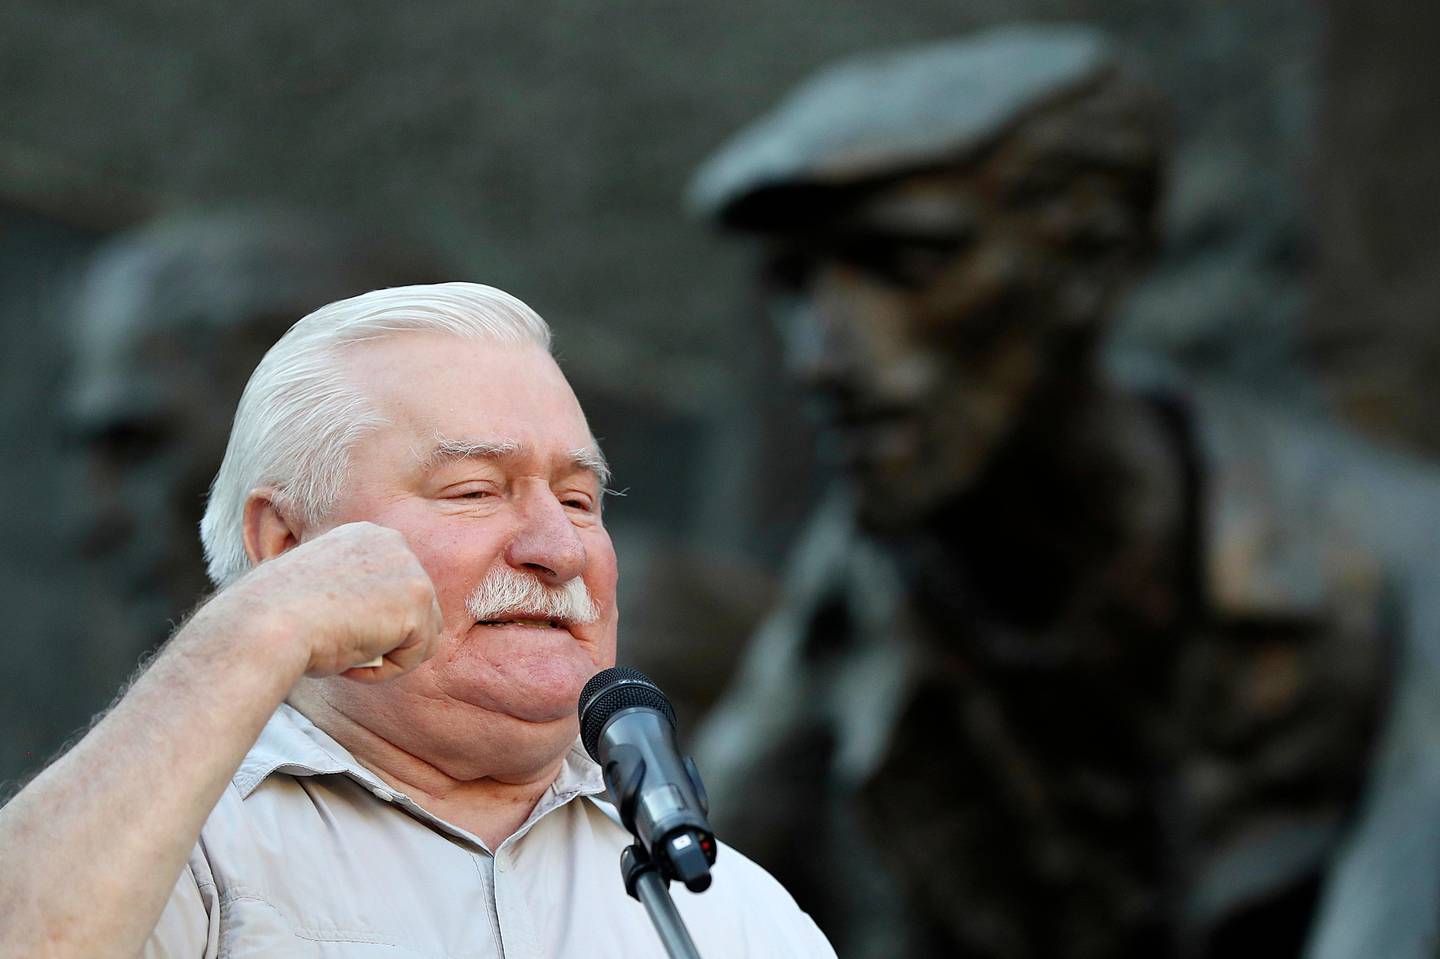 Polish pro-democracy campaigner and Nobel Peace Prize winner Lech Walesa addresses a crowd of right-wing government opponents in Warsaw, Poland, Wednesday, July 4, 2018. Poland?Äôs international isolation and political uncertainty at home has deepened as a purge of the Supreme Court?Äôs justices took effect, with the chief justice defiantly refusing to step down. First President Malgorzata Gersdorf arrived for work as usual at the court in Warsaw, vowing to continue her constitutionally mandated term, which runs through 2020. (AP Photo/Czarek Sokolowski)